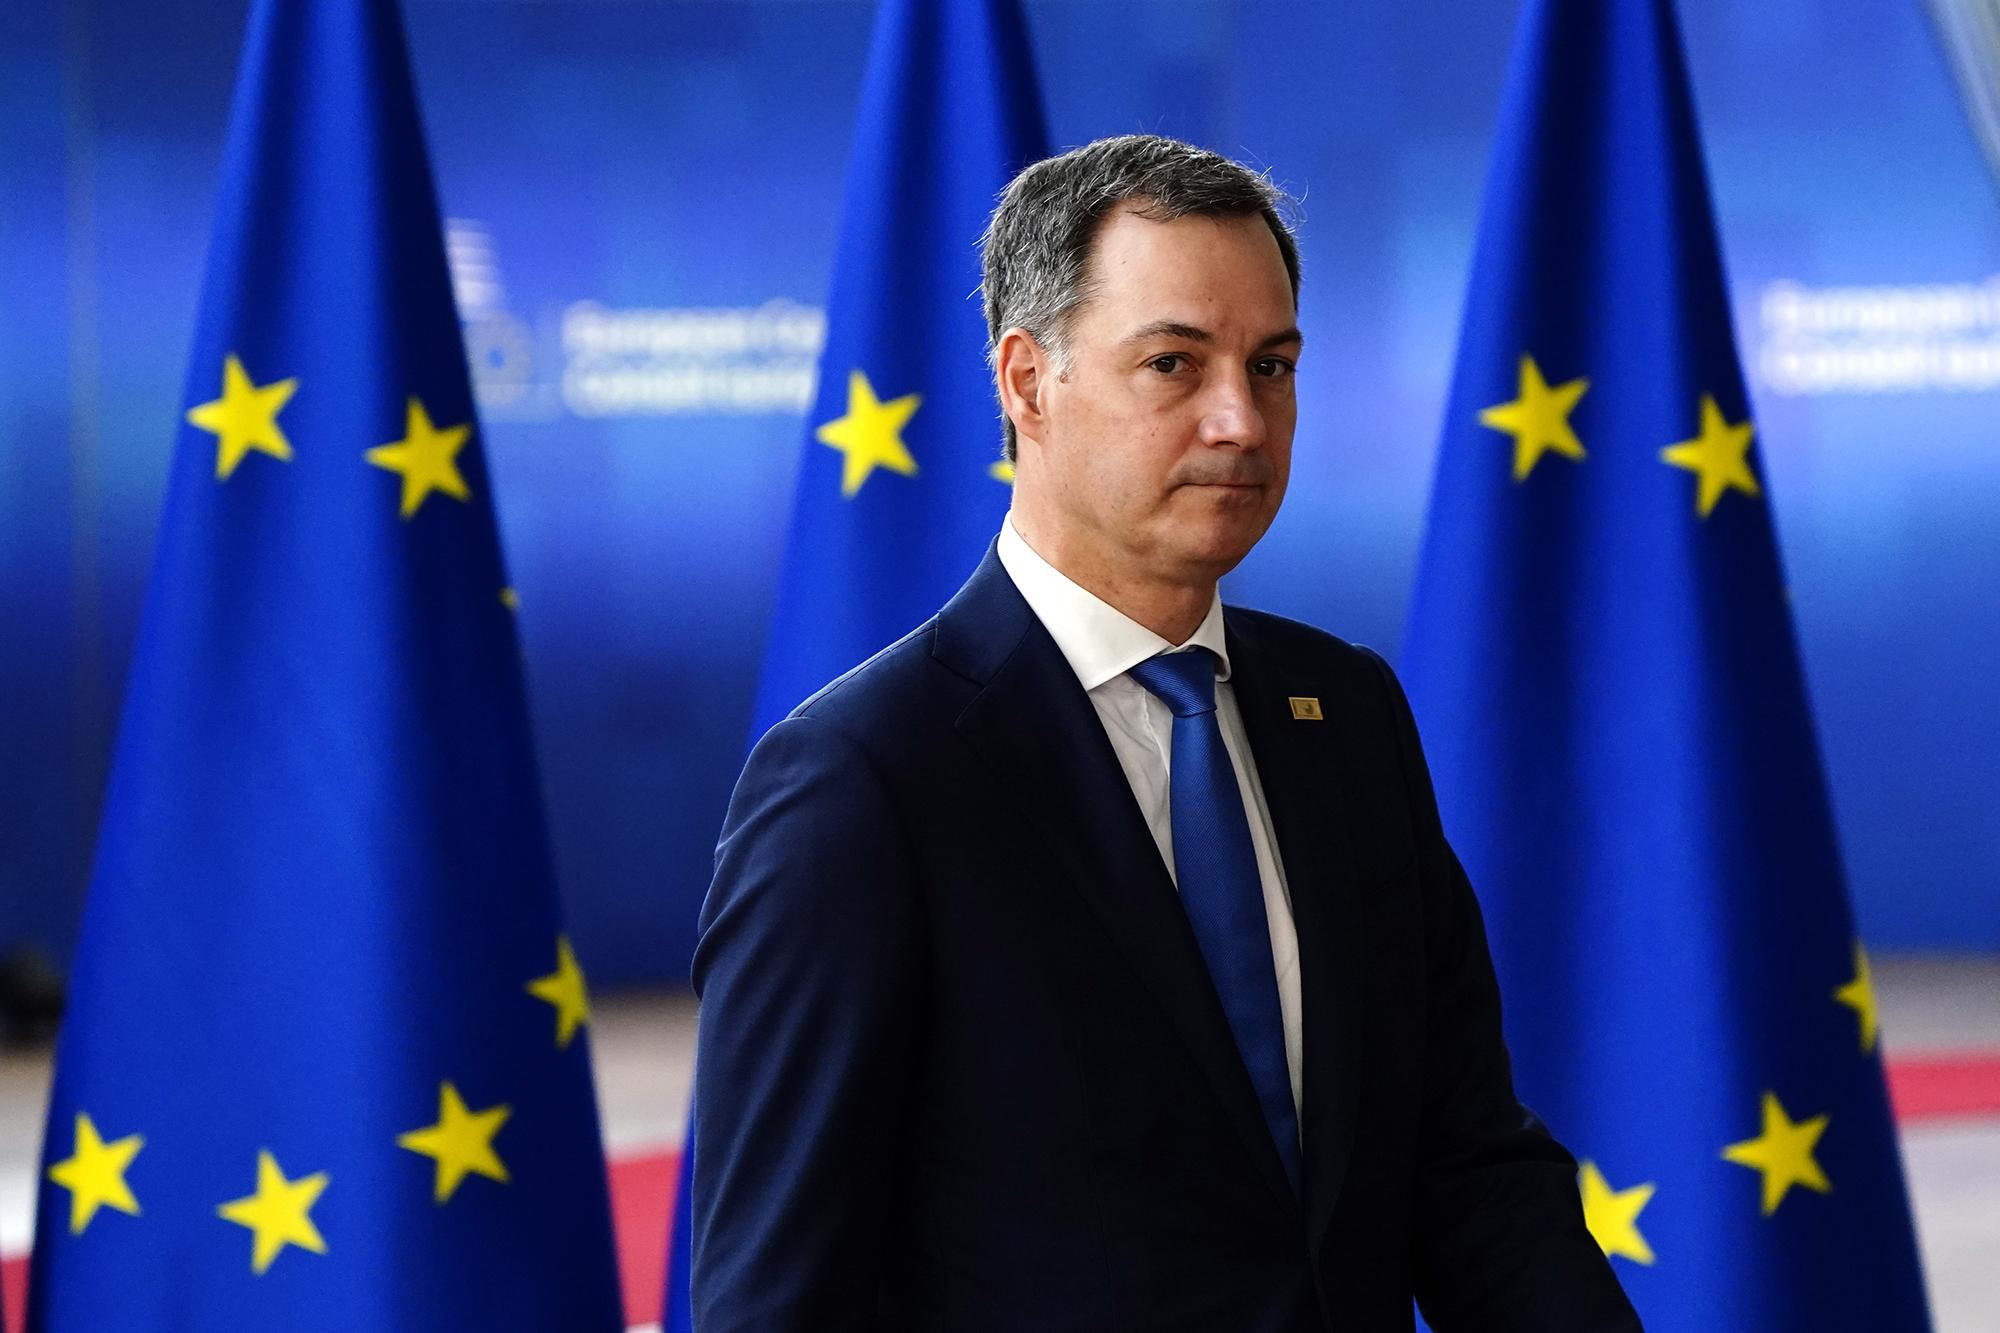 Belgium's Prime Minister Alexander De Croo arrives at a European Union Council Meeting on March 24, in Brussels, Belgium. 